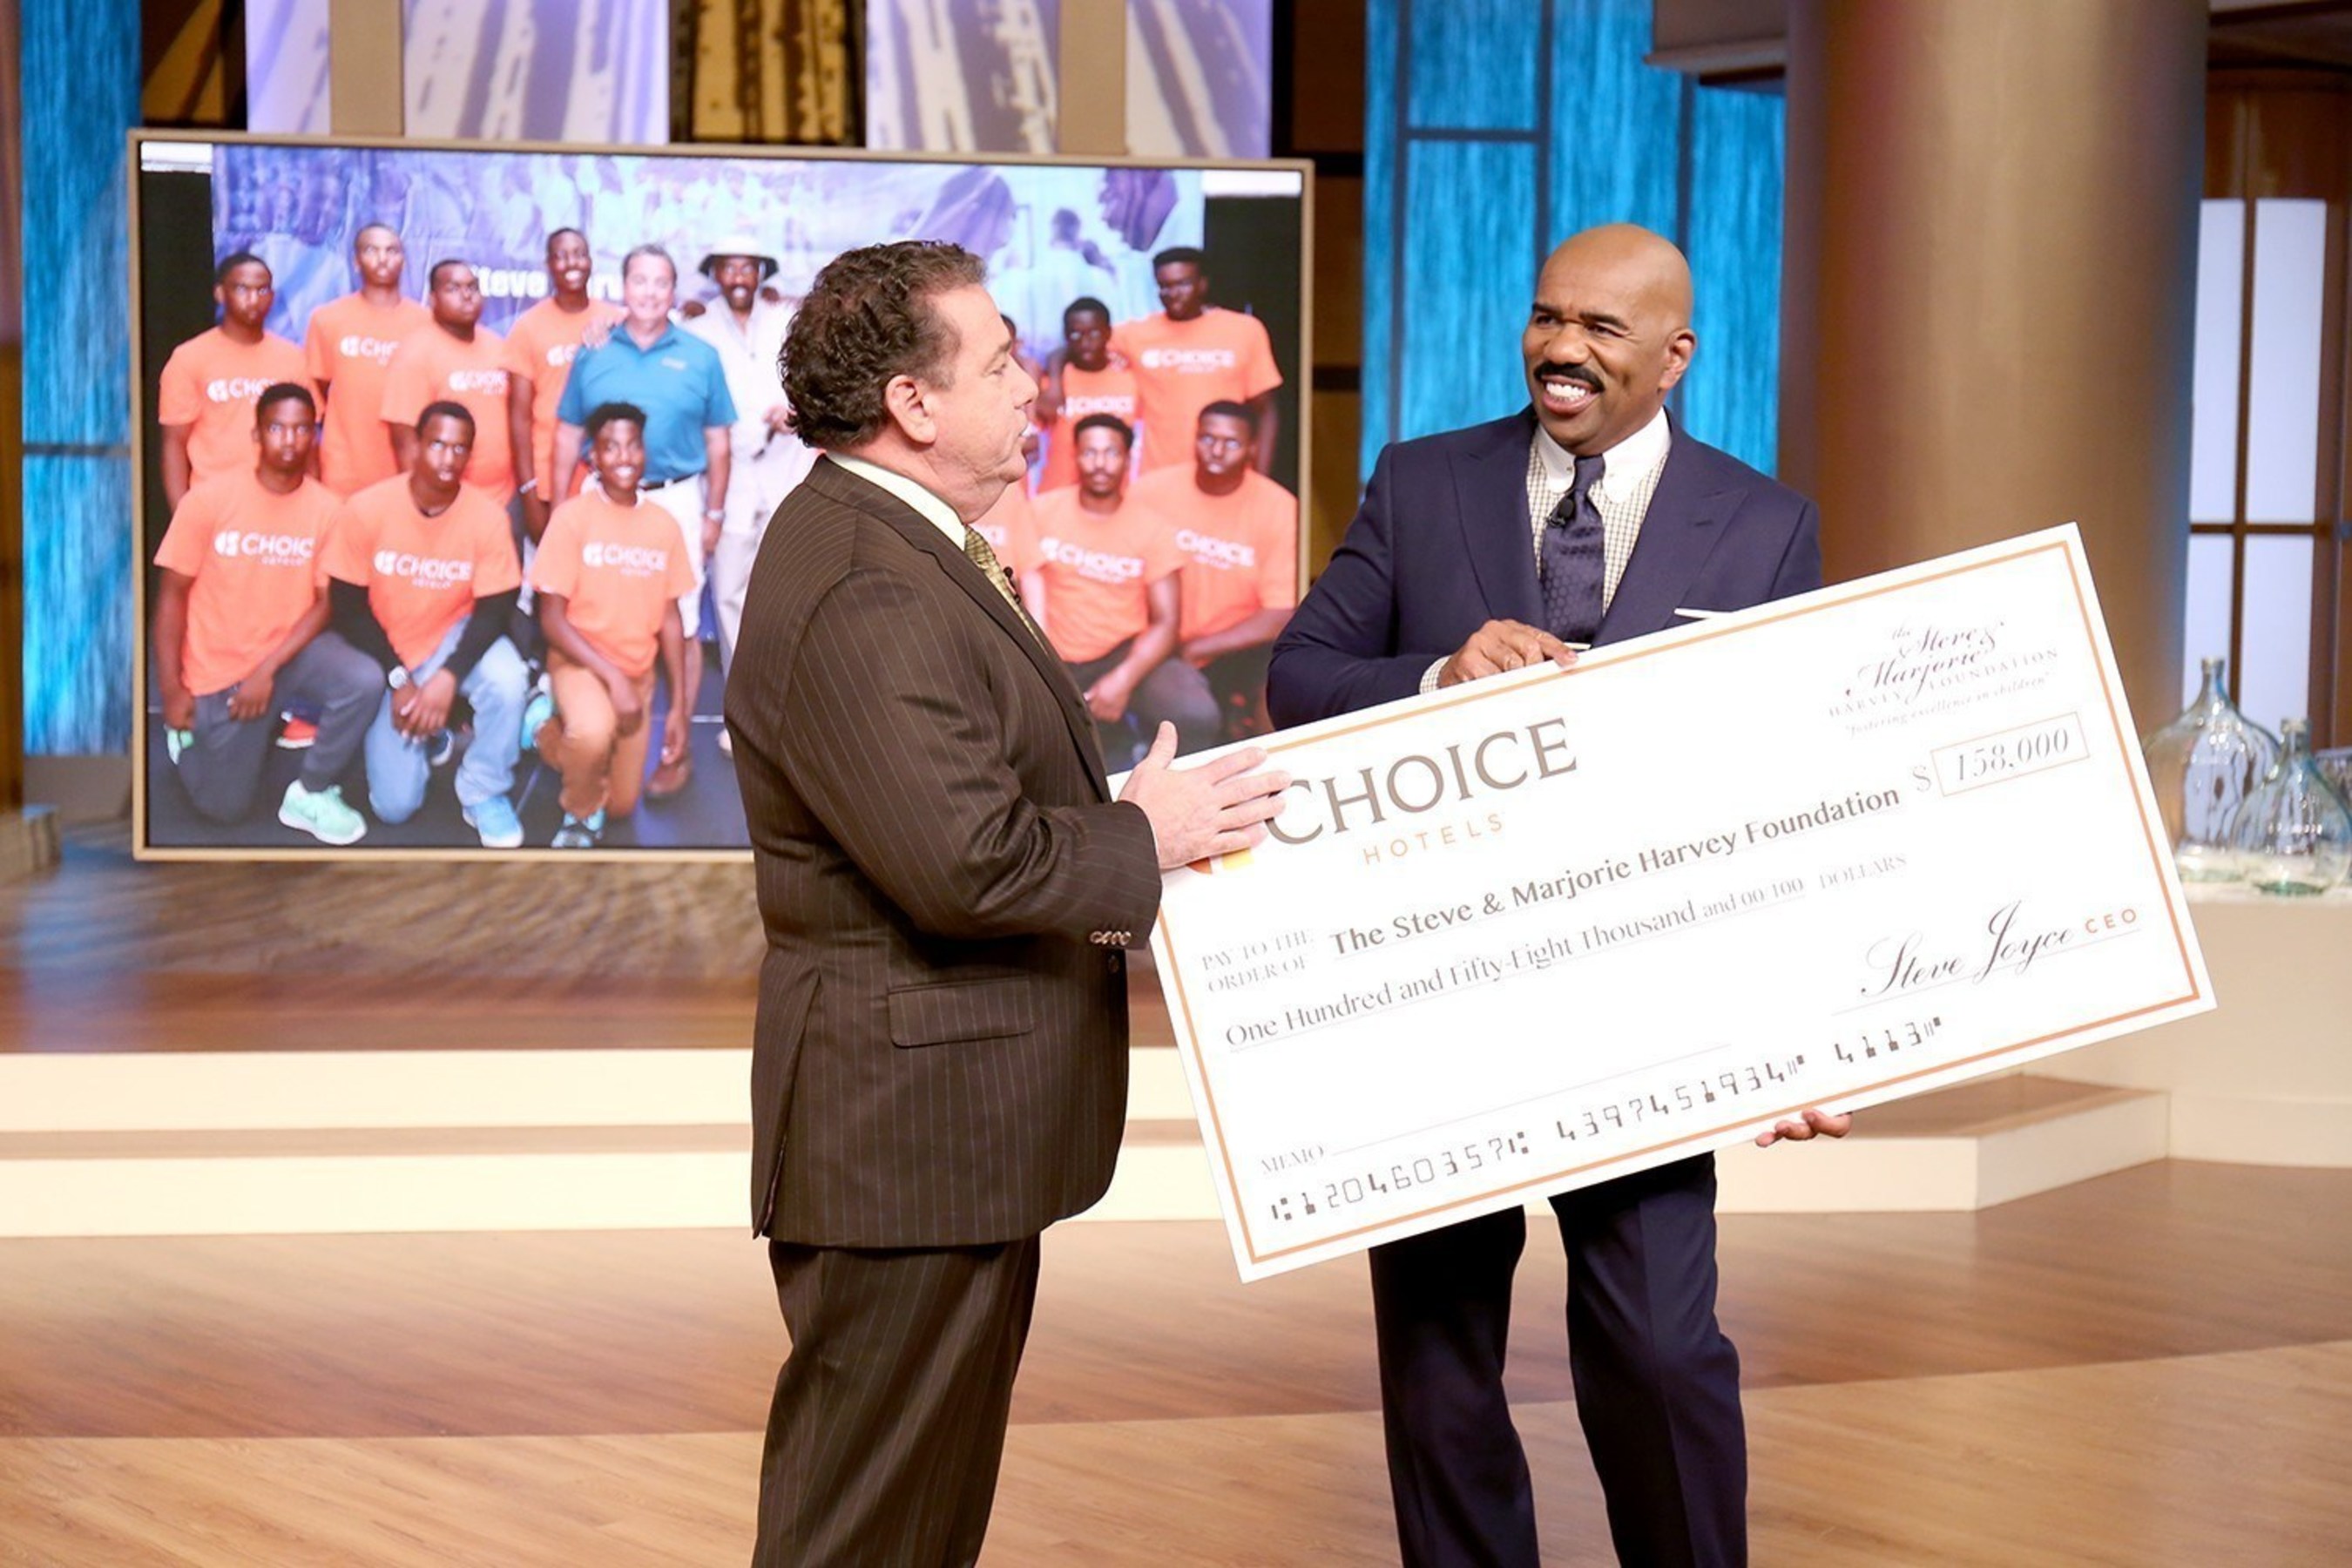 Choice Hotels President and CEO presents donation for the Steve & Marjorie Harvey Foundation